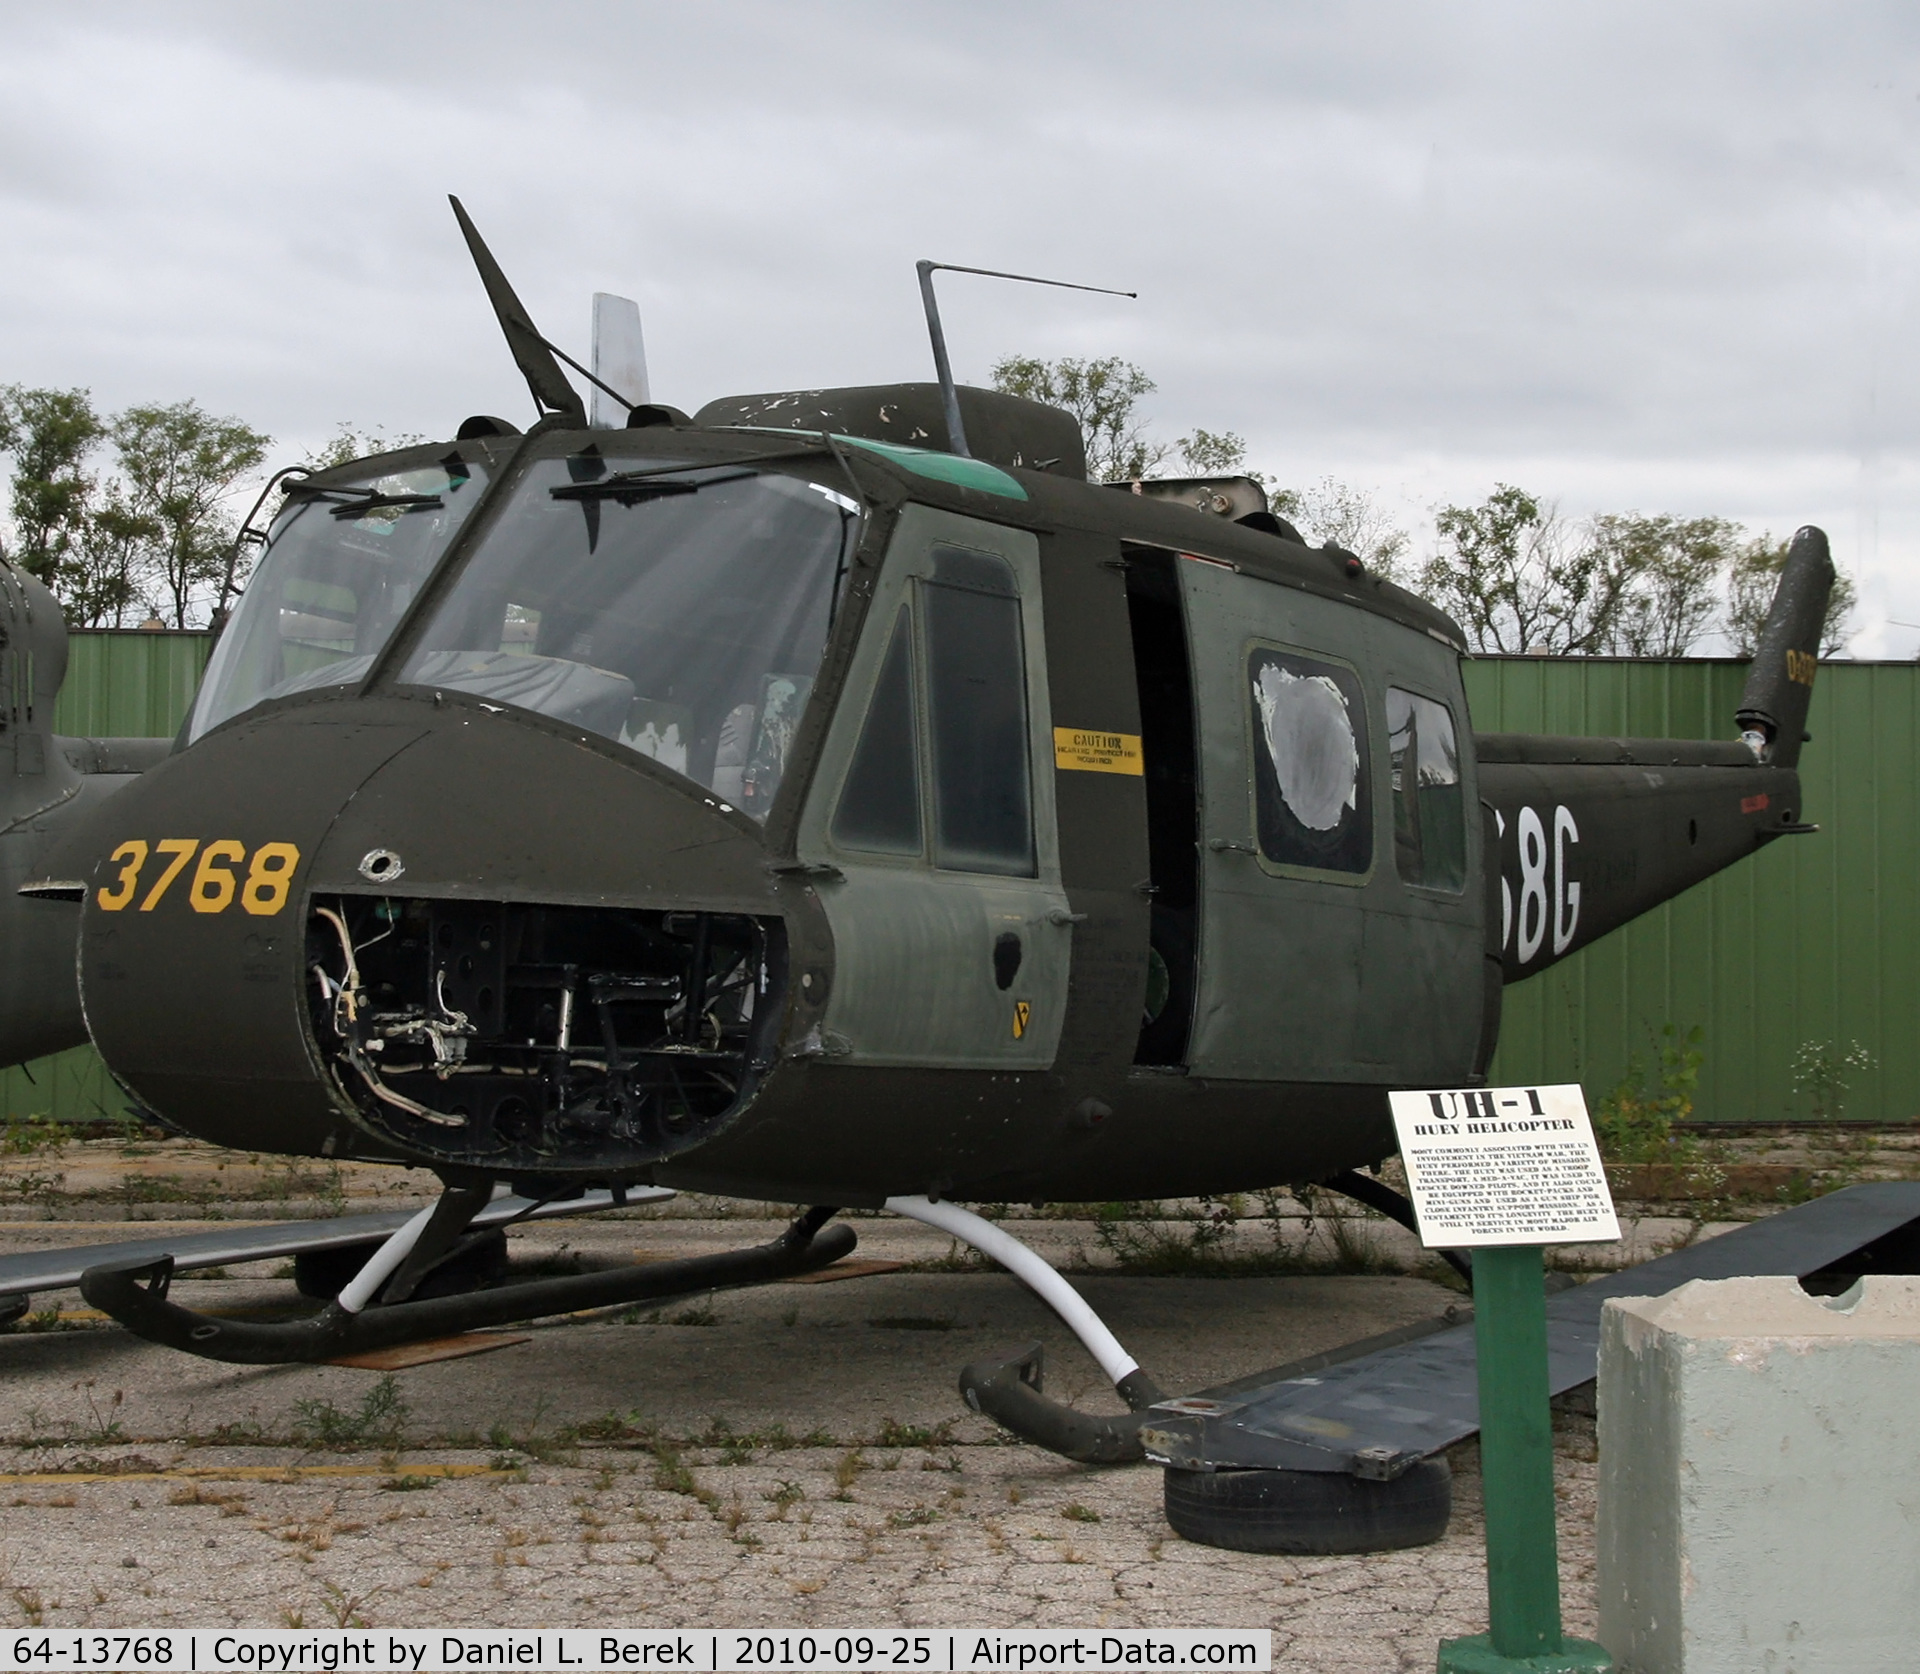 64-13768, 1964 Bell UH-1H Iroquois. C/N 4475, Vietnam-era Huey on display at the Russell Military Museum